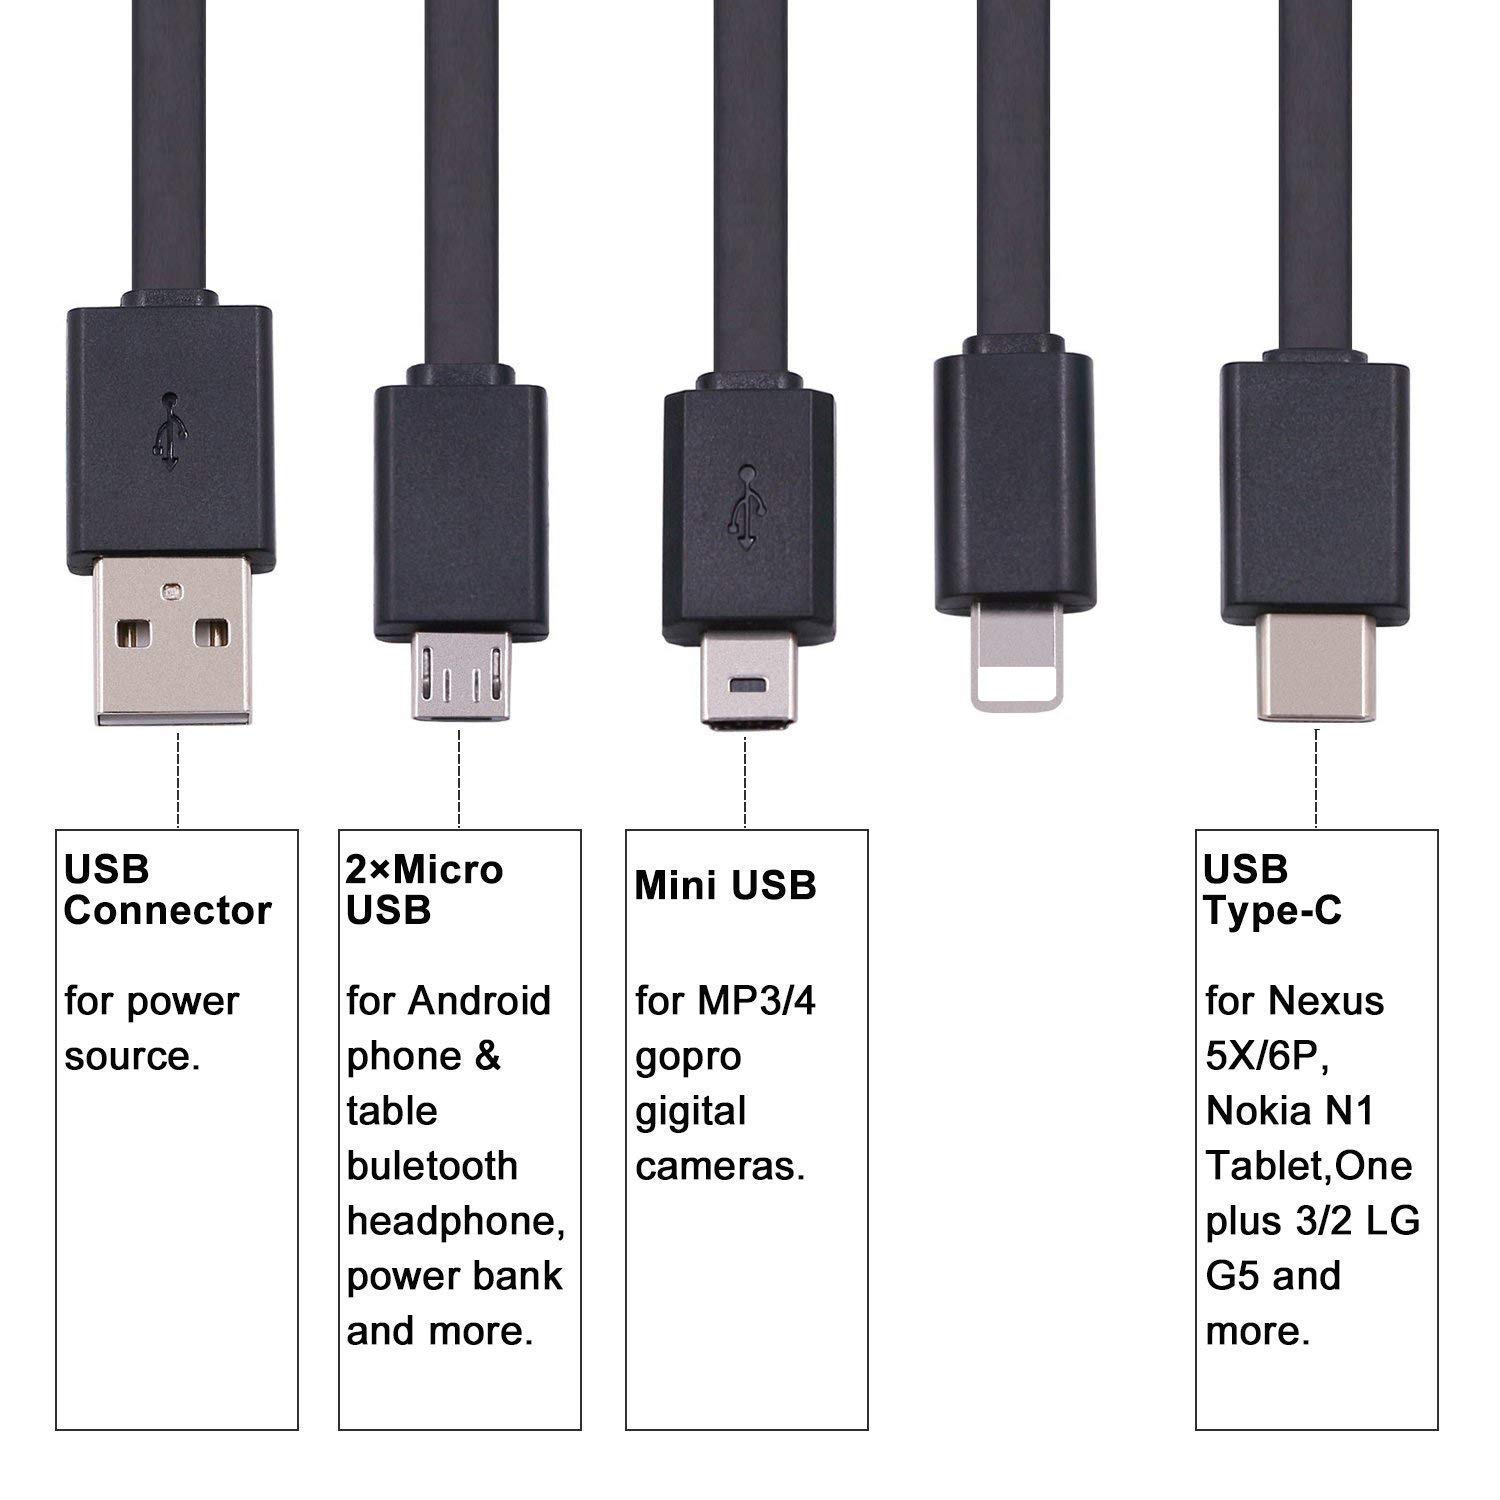 USB cable and port connection